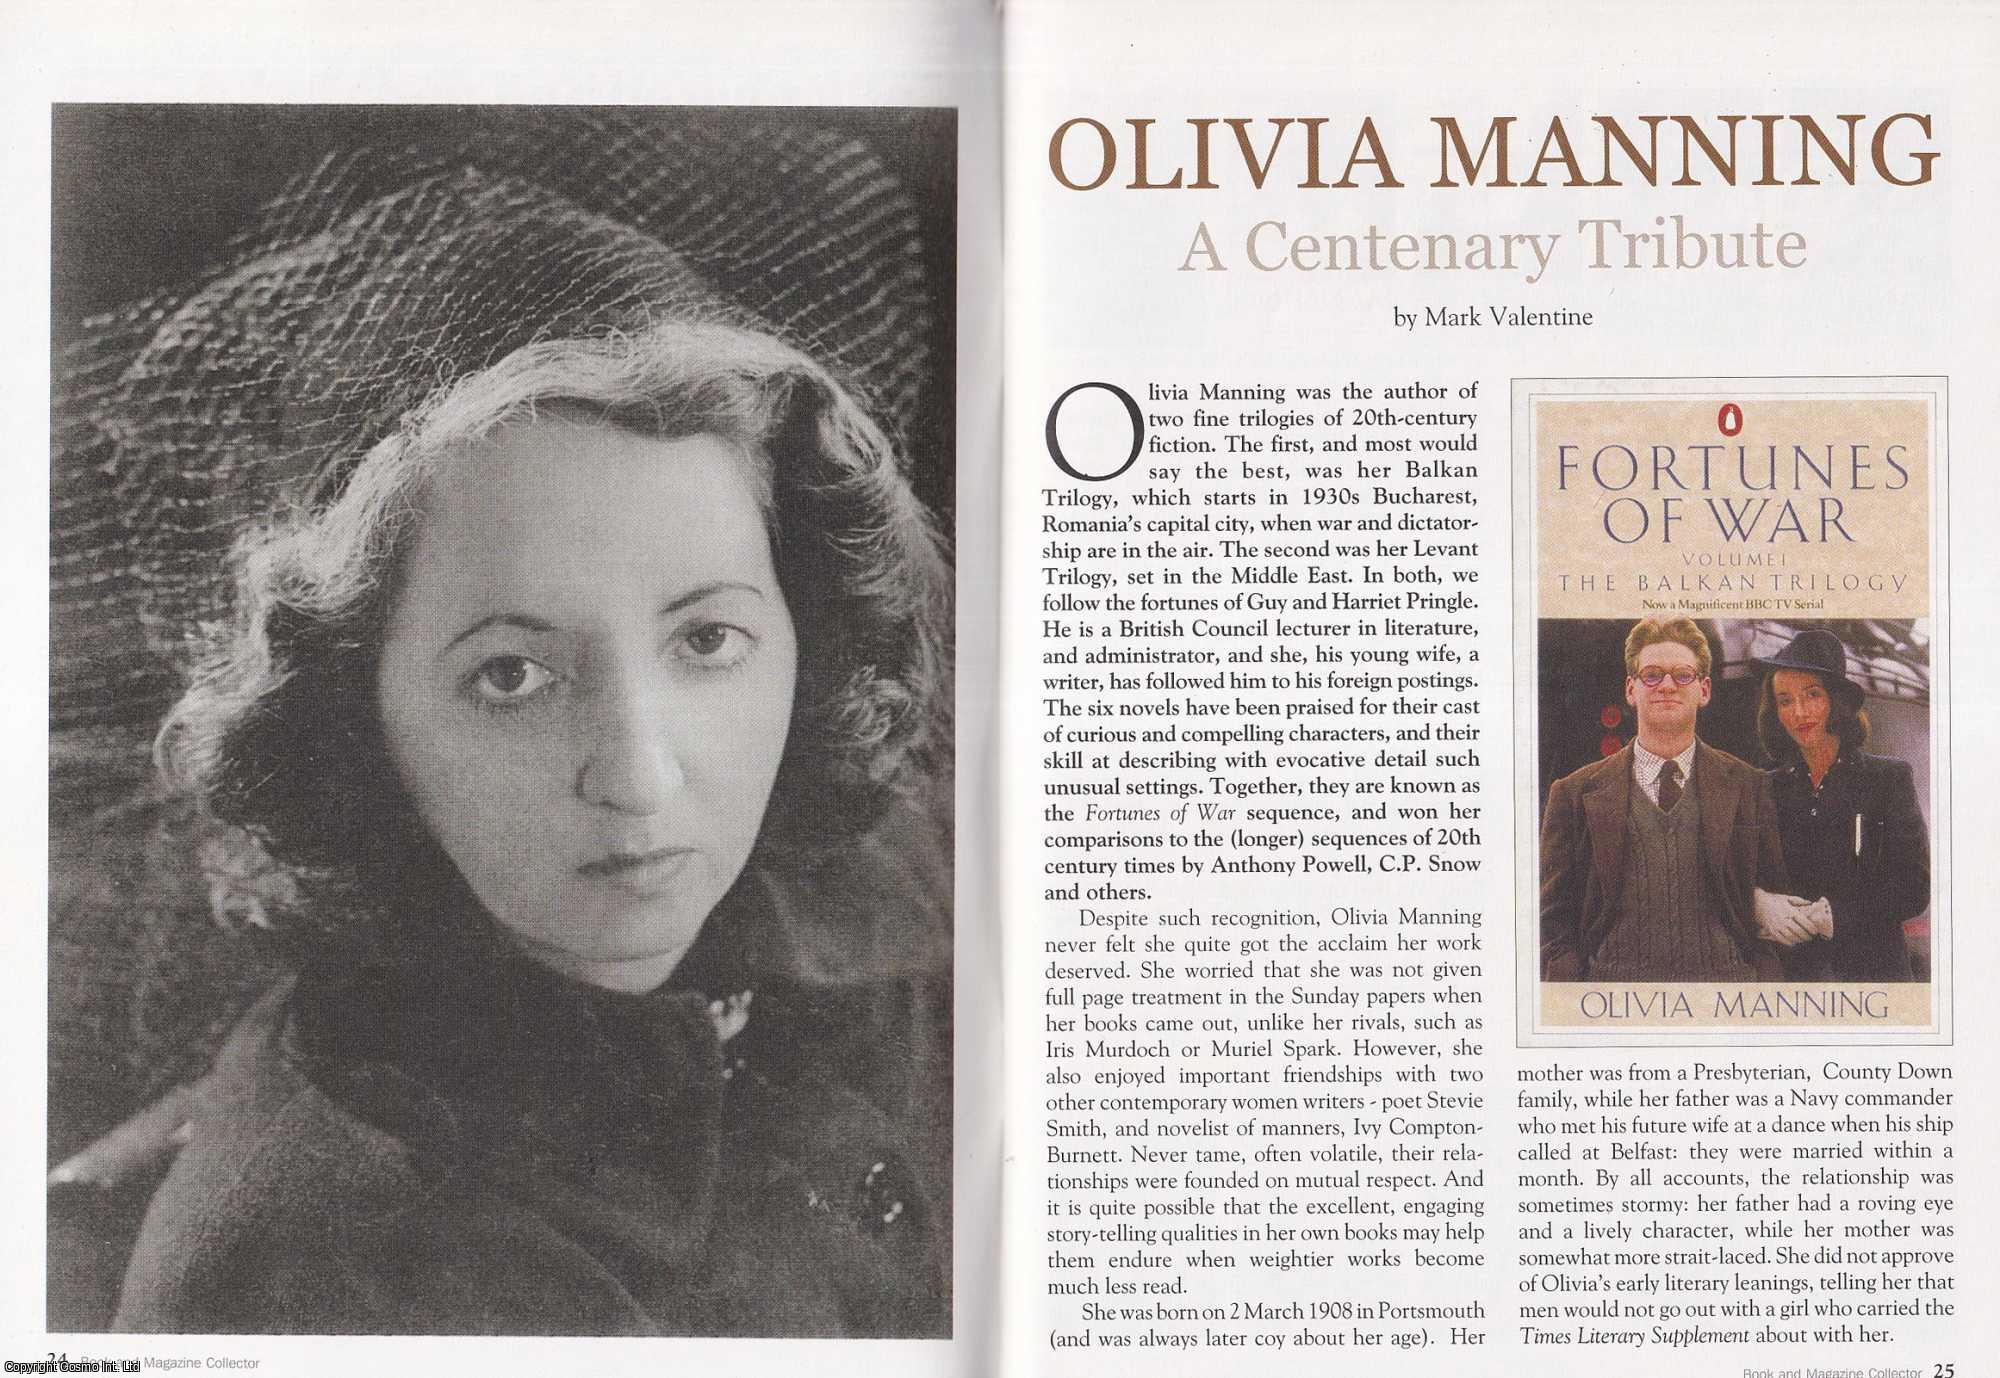 Mark Valentine - Olivia Manning. A Centenary Tribute. This is an original article separated from an issue of The Book & Magazine Collector publication.